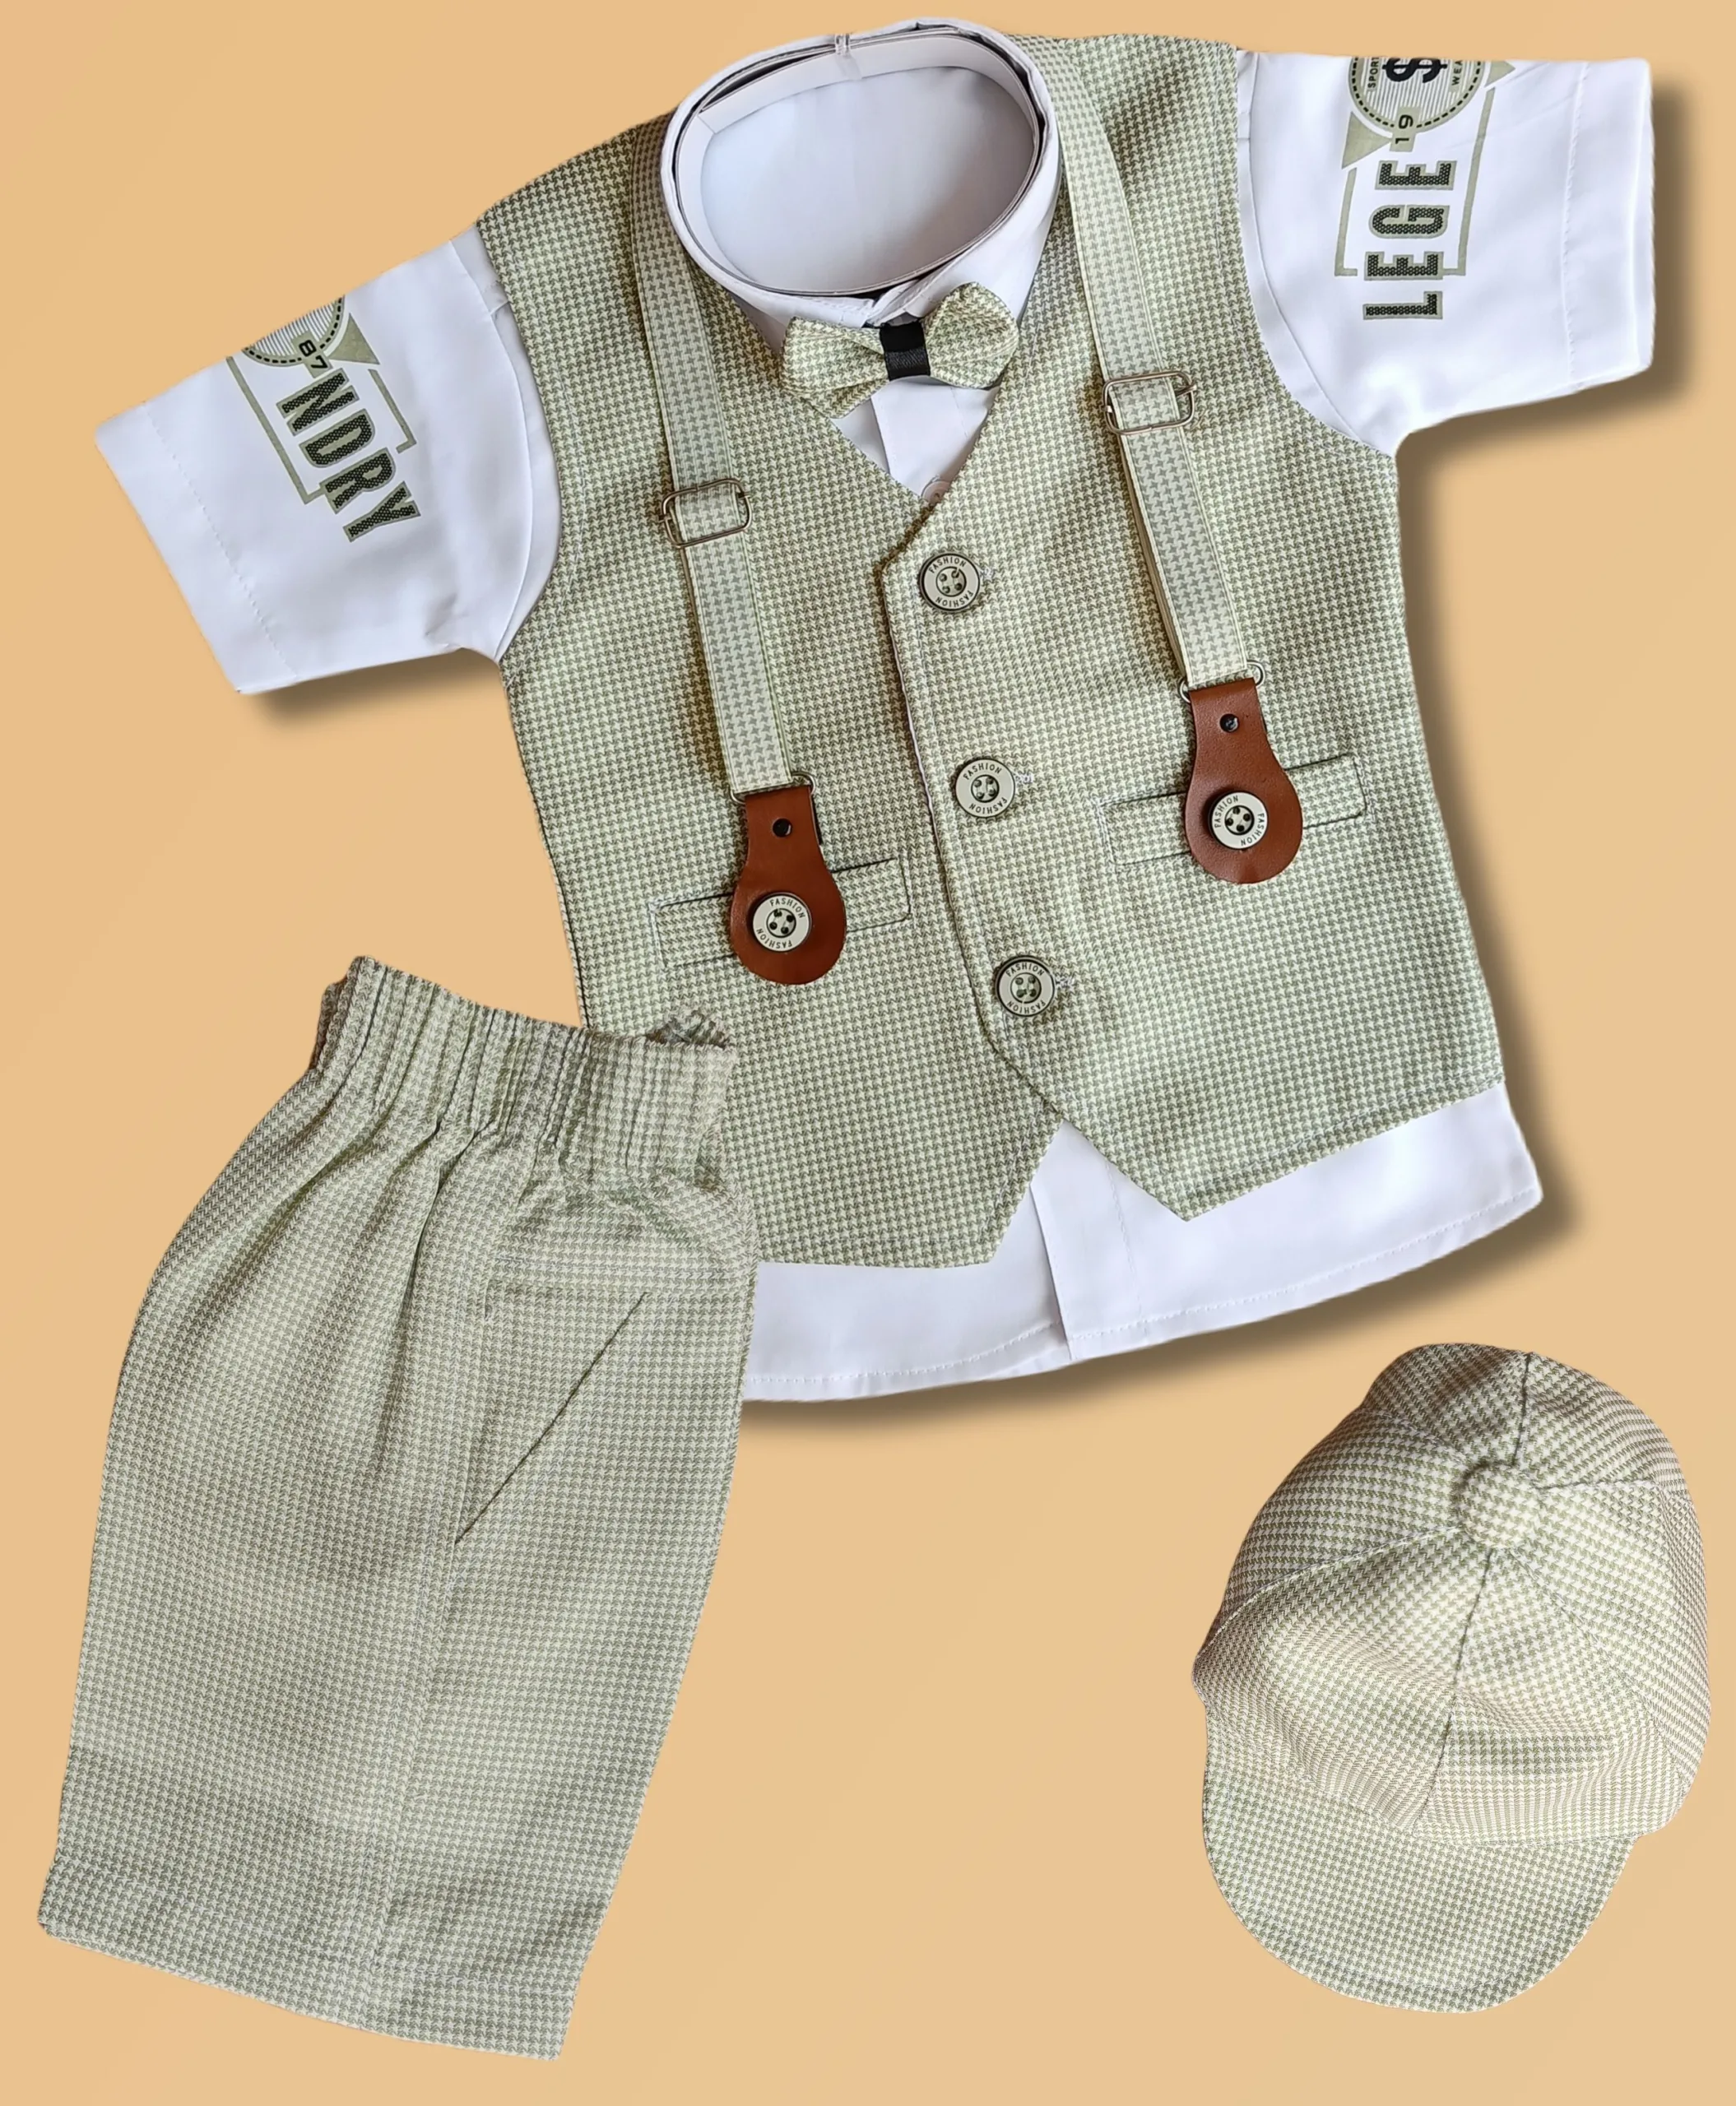 TAIAOJING Baby Boy Clothes Outfits Toddler Kids India | Ubuy